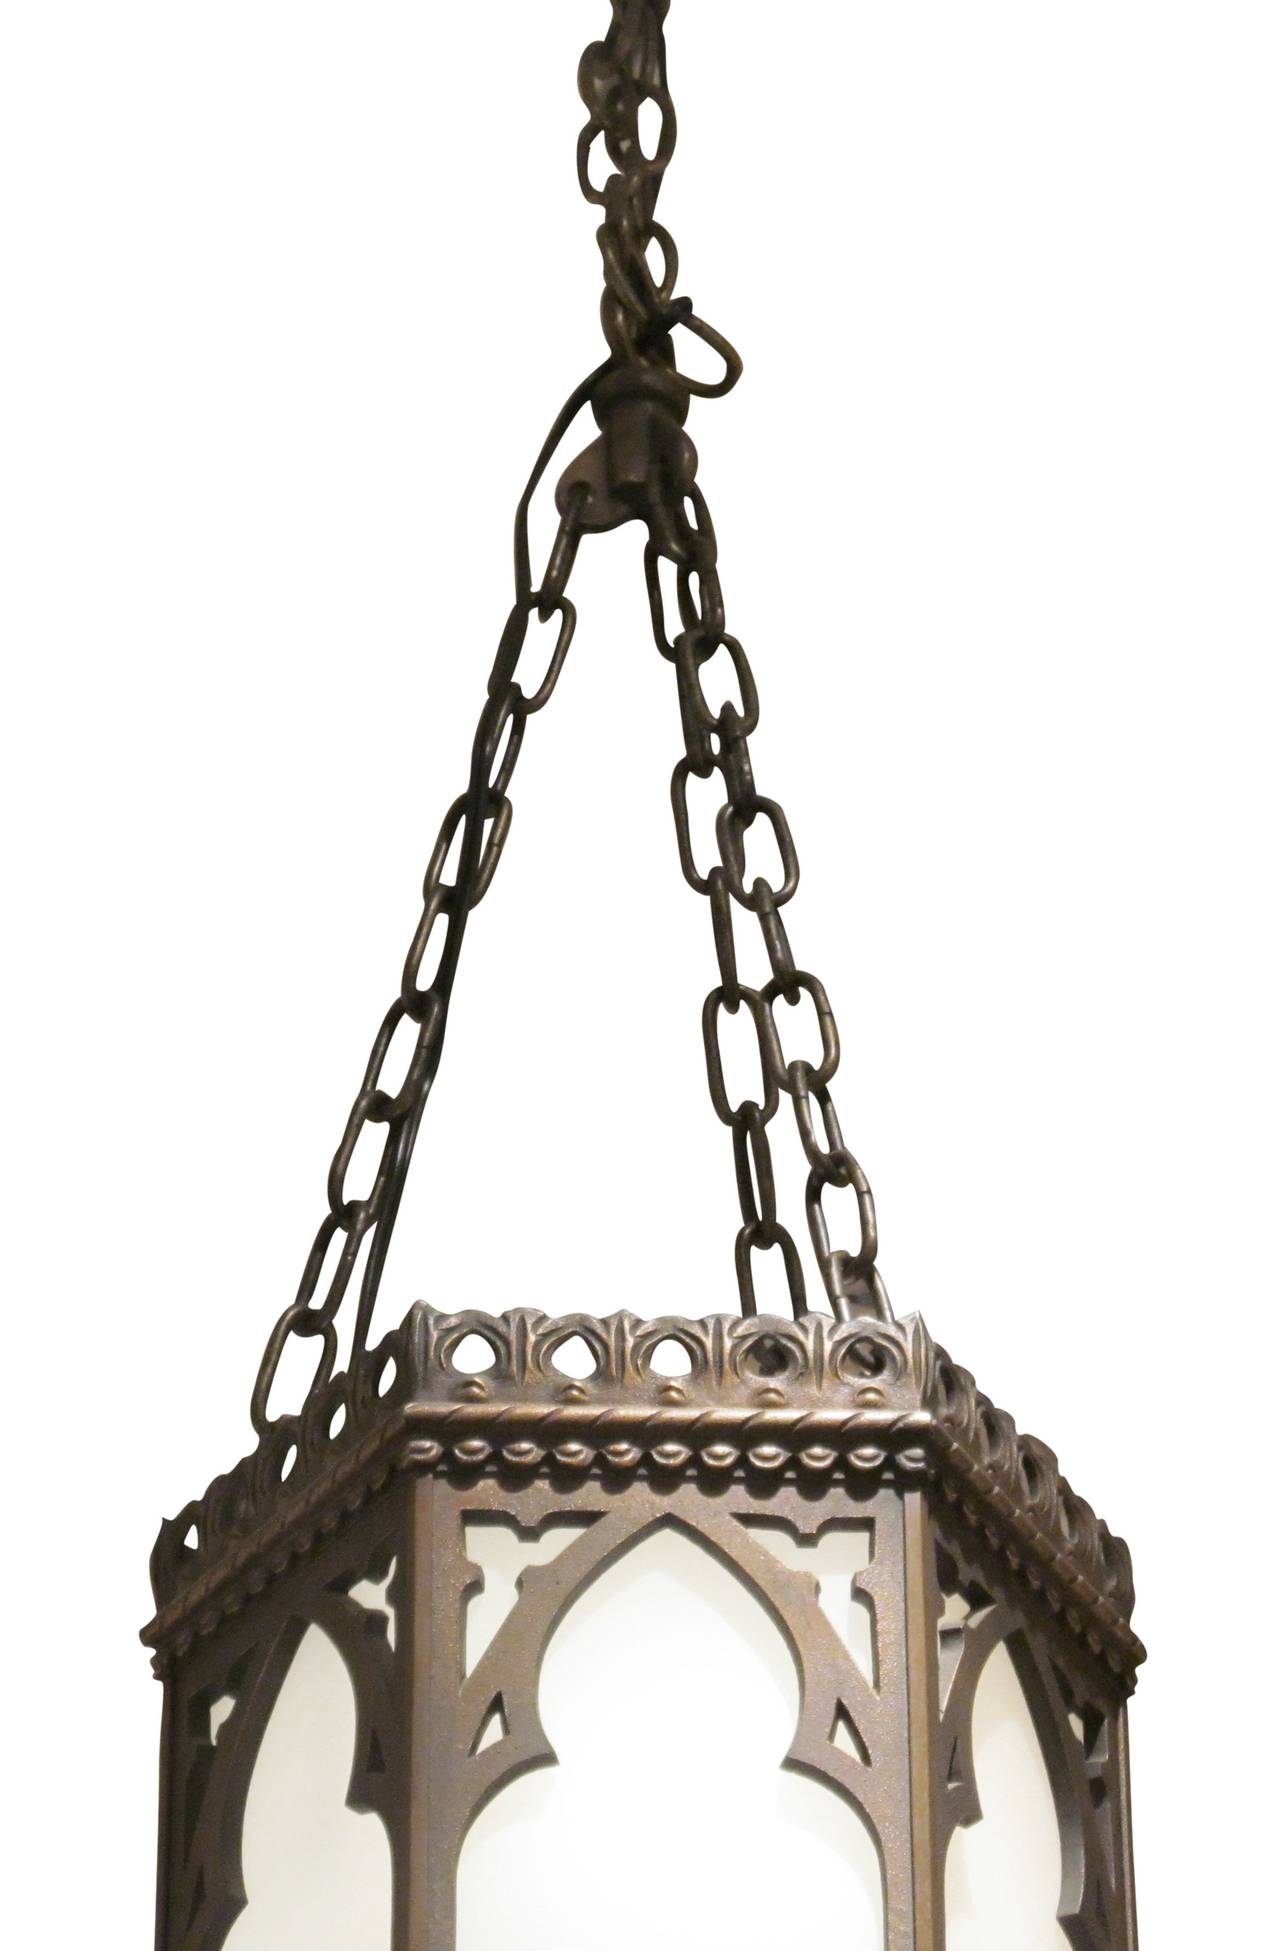 1920s large hexagon bronze Gothic lantern pendant with arches. The frame is hand-forged bronze. This light has been completely restored and rewired. At the time of posting several were available. Priced each. This item can be viewed at our 5 East